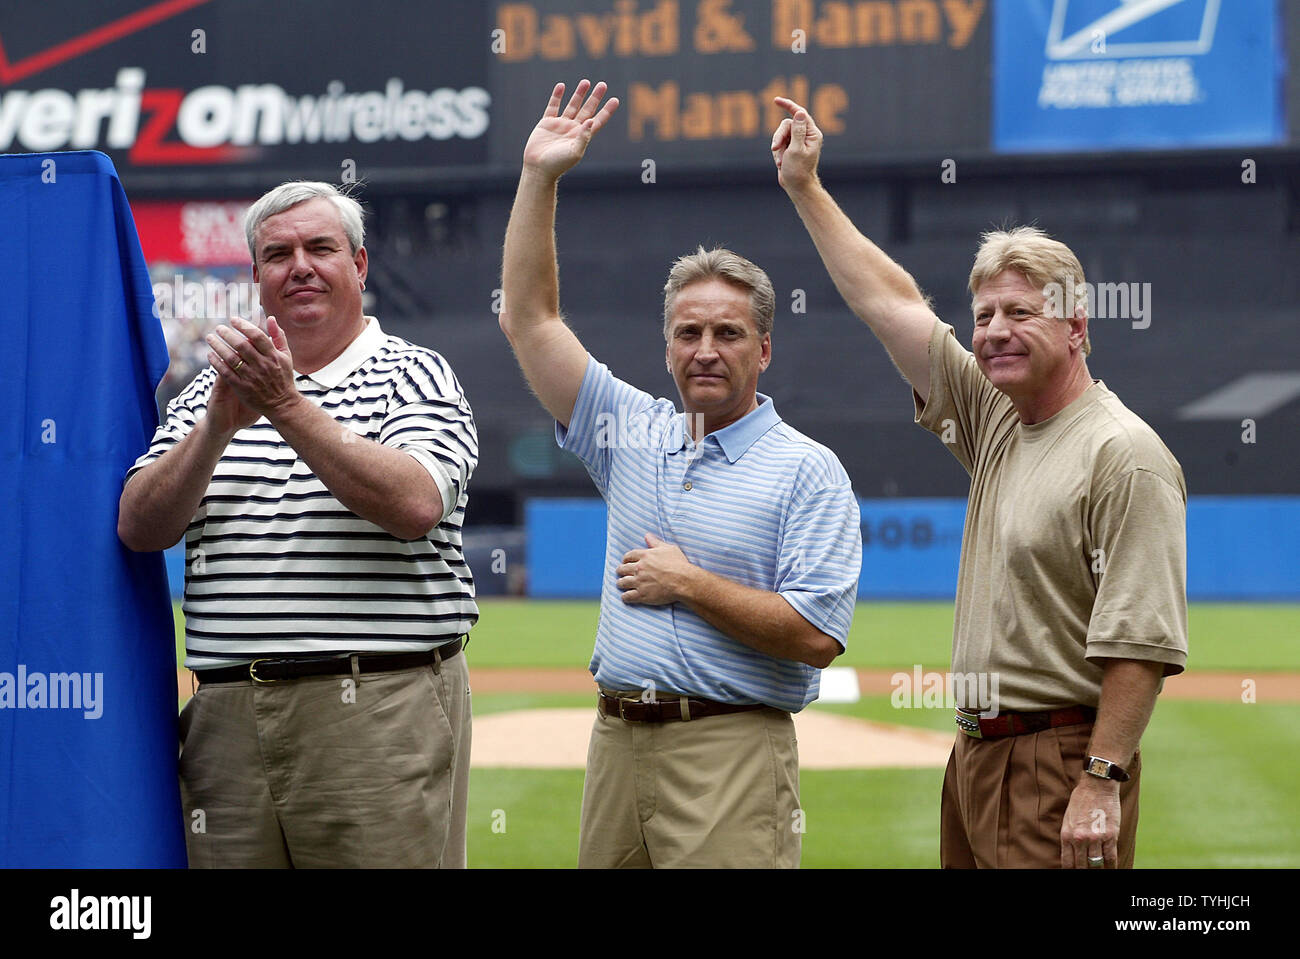 Postmaster General and CEO of the U.S. Postal Service, John E. Potter (L)  with Mickey Mantle's sons Daniel Mantle (C) and David Mantle during the  Home Plate Ceremony of the Baseball Sluggers